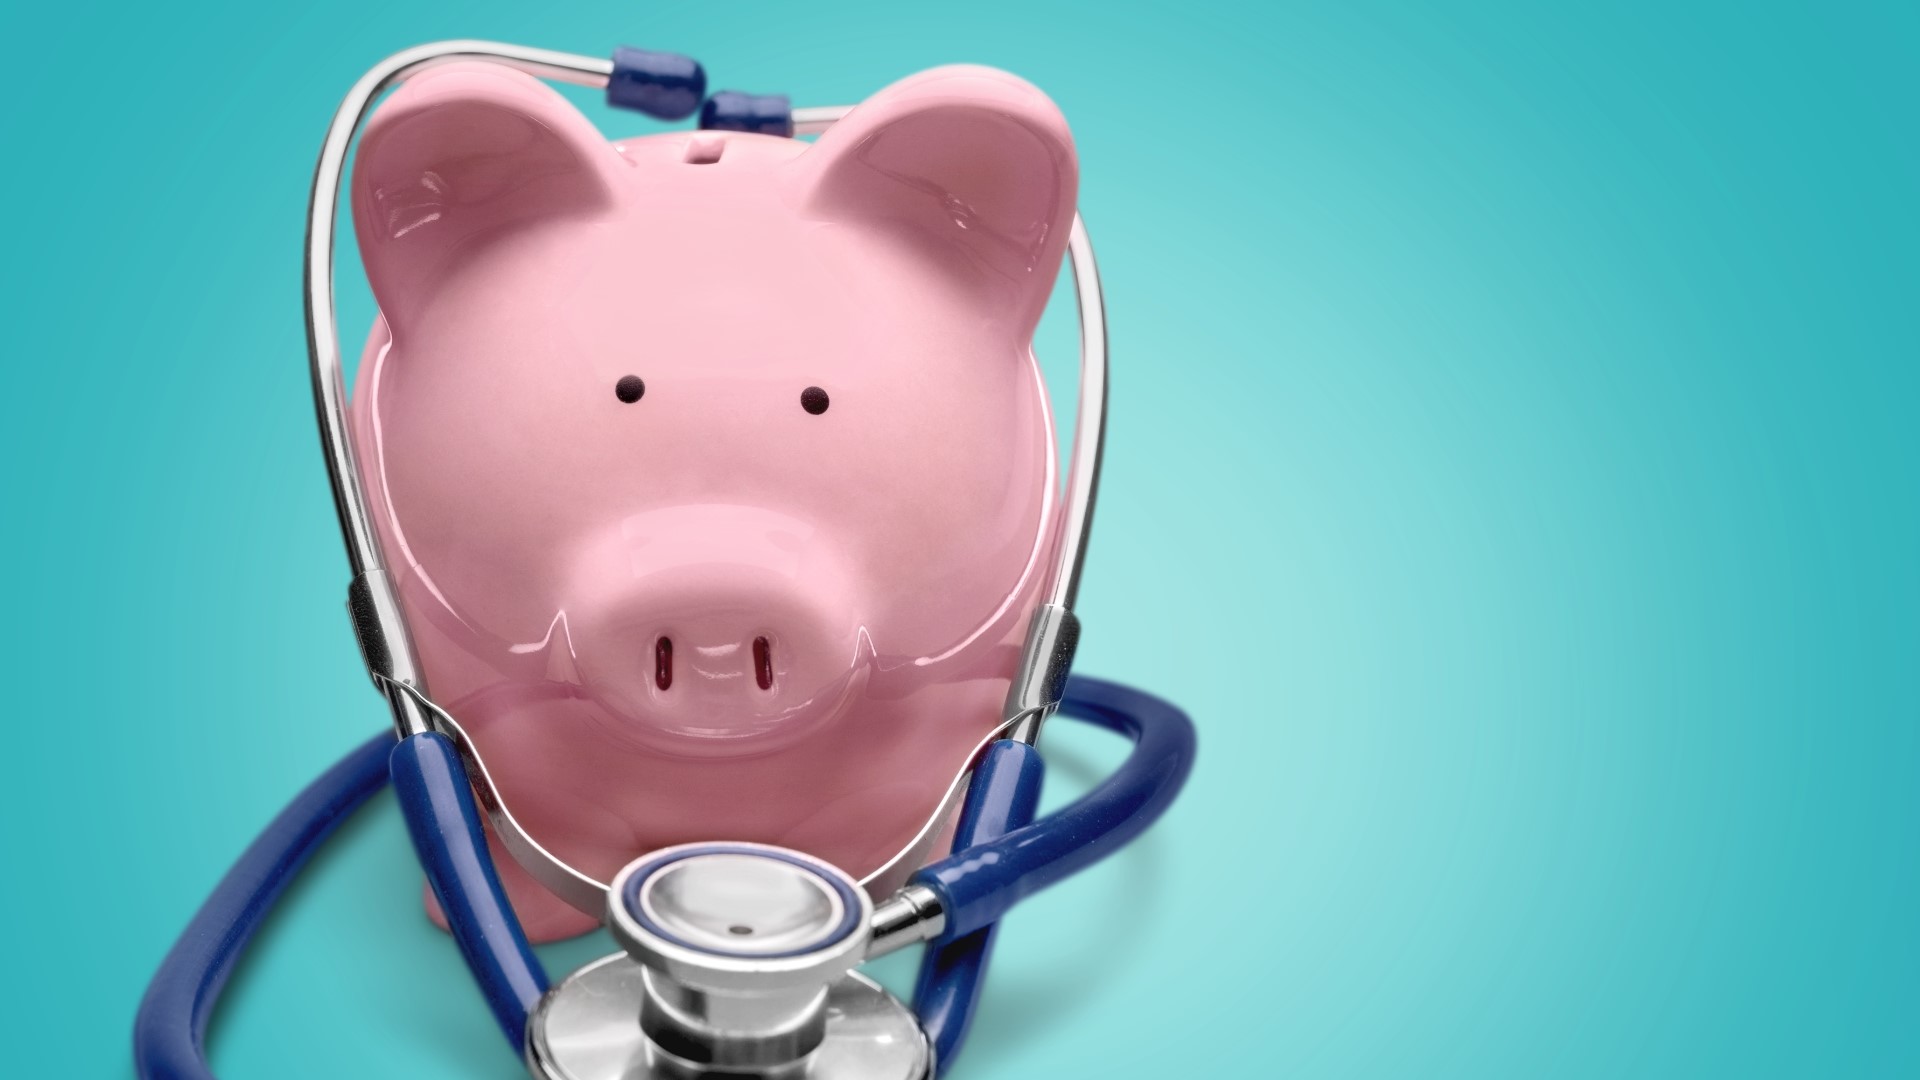 Do you know the difference between a Healthcare Savings Account and a Flexible Spending Account? Here's how to get the most out of either one. Sponsored by Premera.